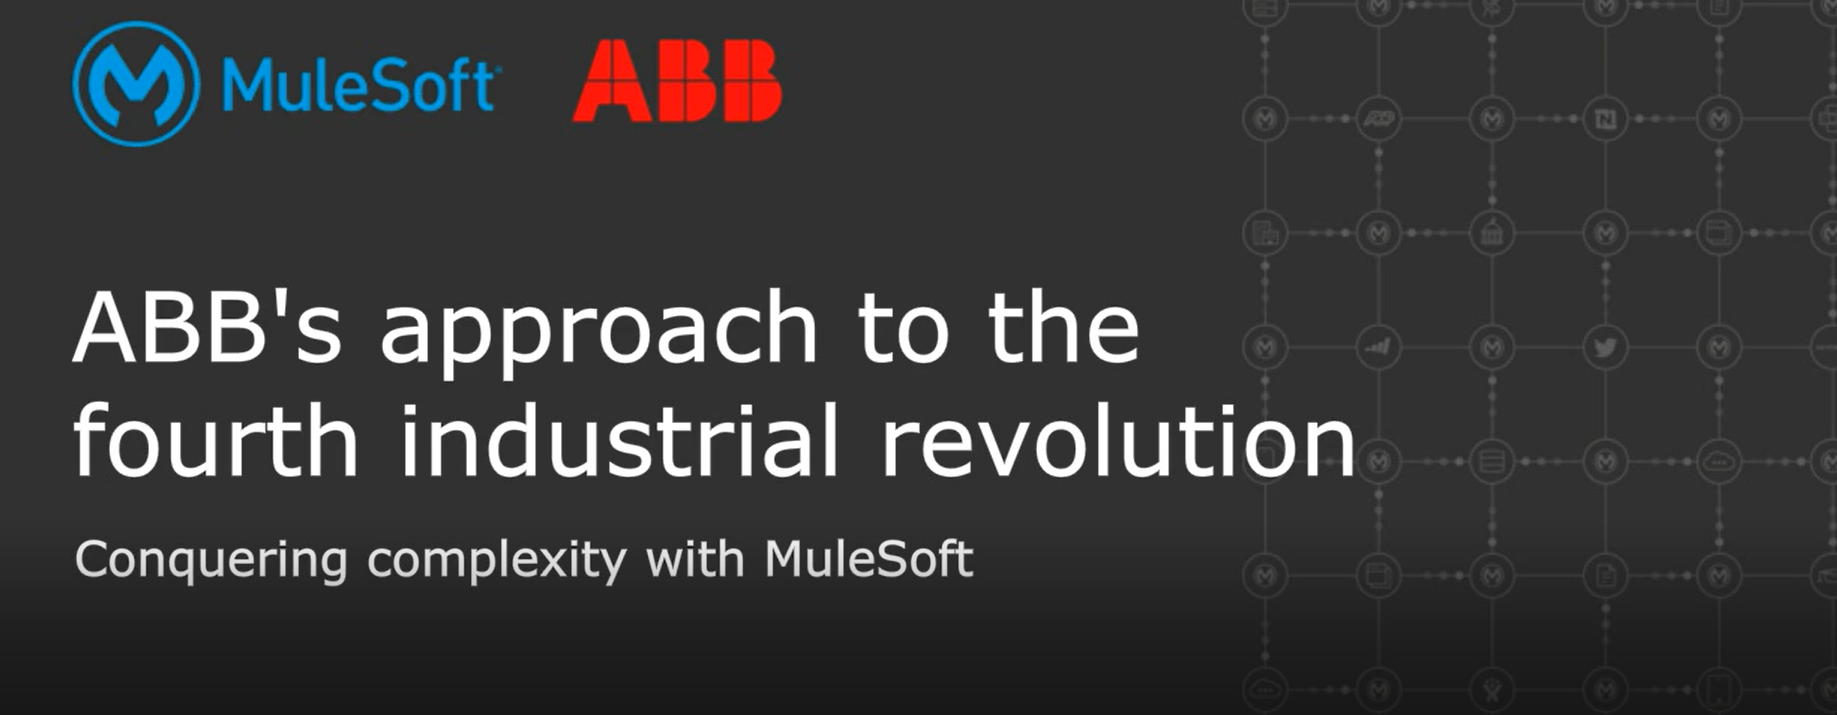 5 2 - ABB's approach to the fourth industrial revolution: Conquering complexity with MuleSoft